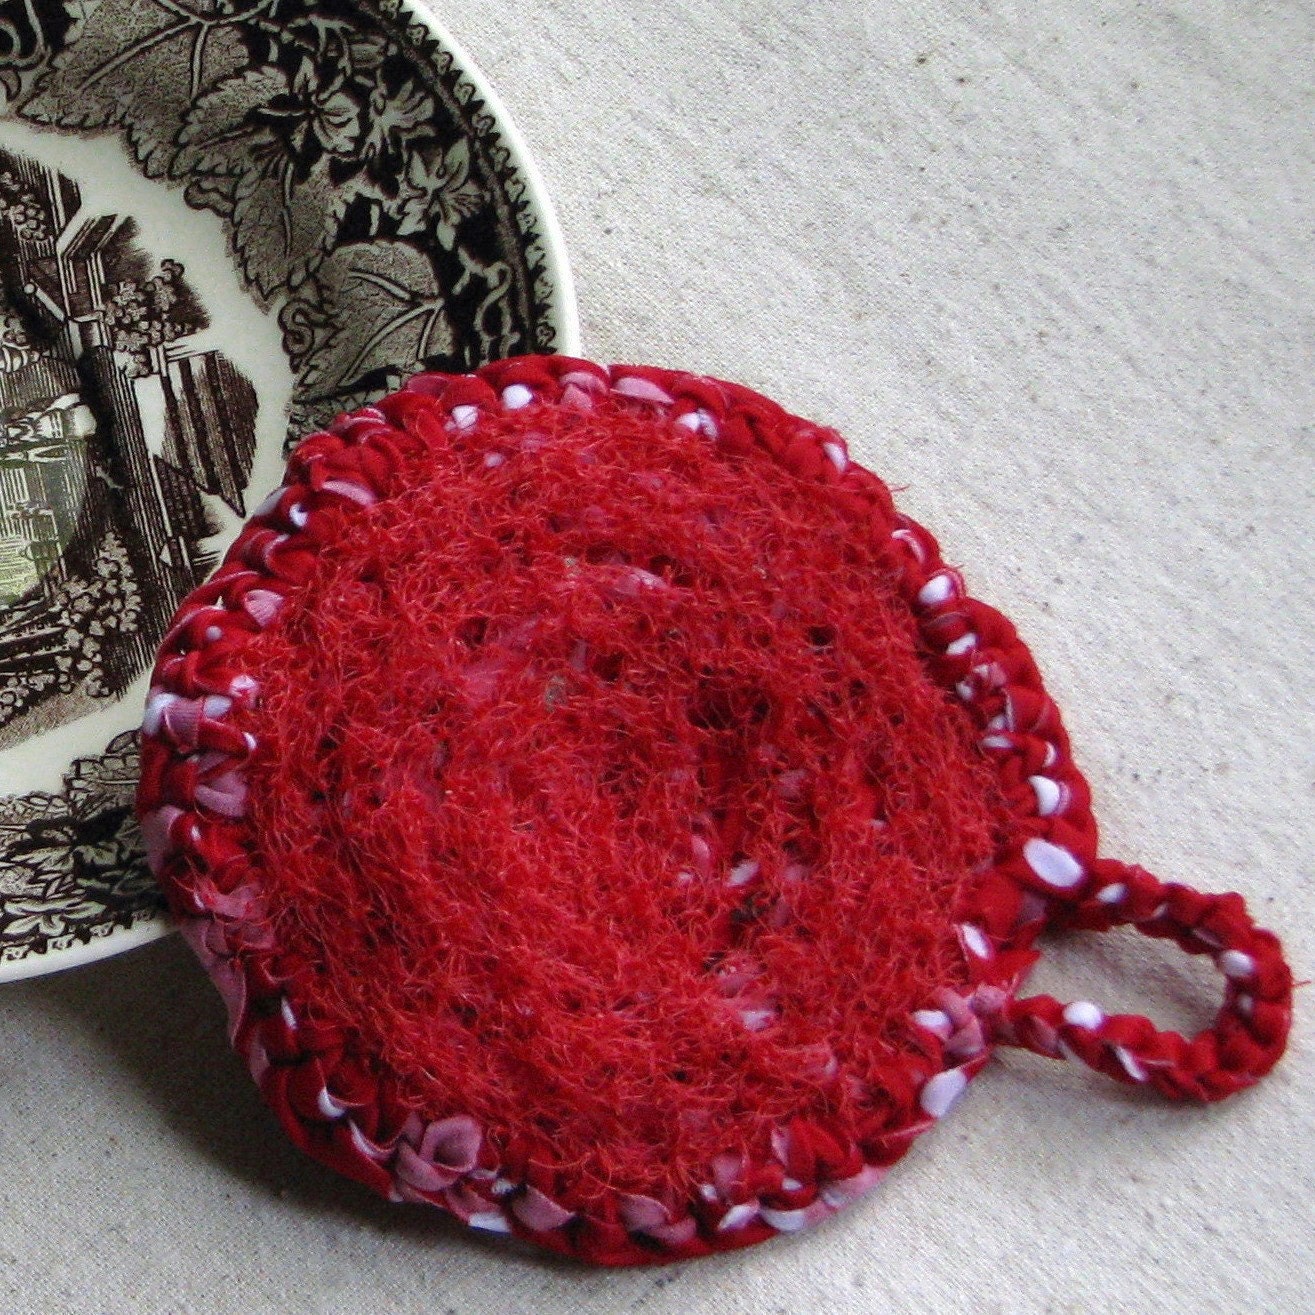 Dish scrubby - makes great hostess gift, crocheted from eco friendly repurposed nylon, speckled red